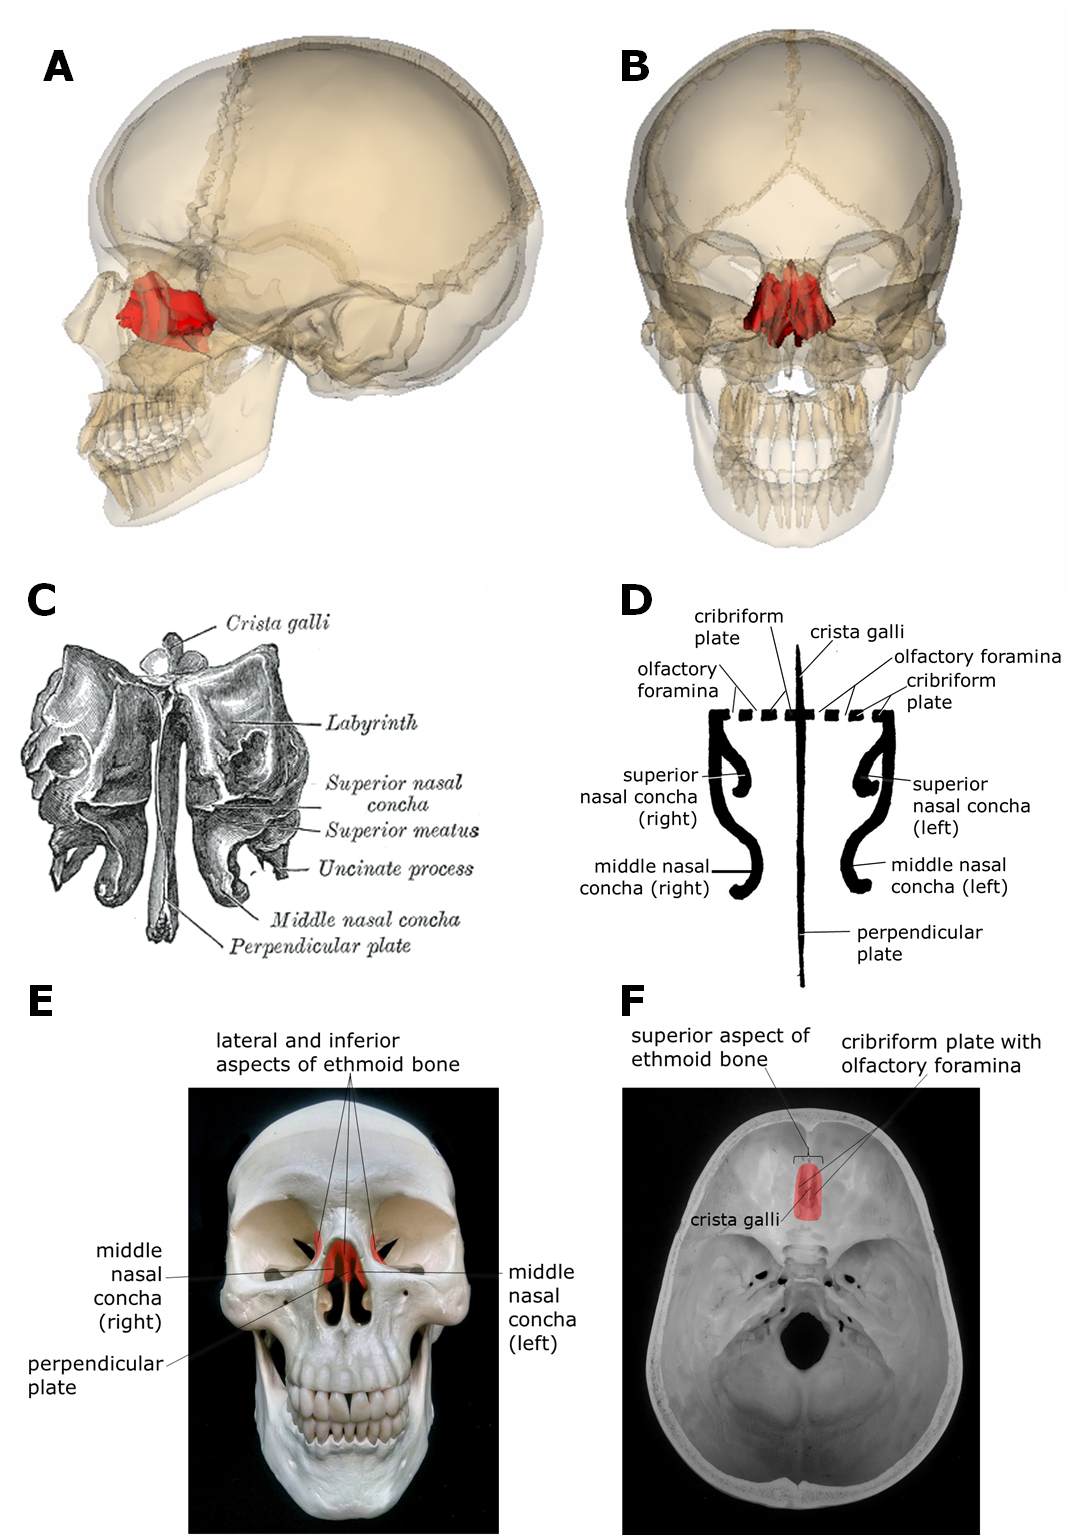 Diagrams showing the location and structure of the ethmoid bone in the skull.